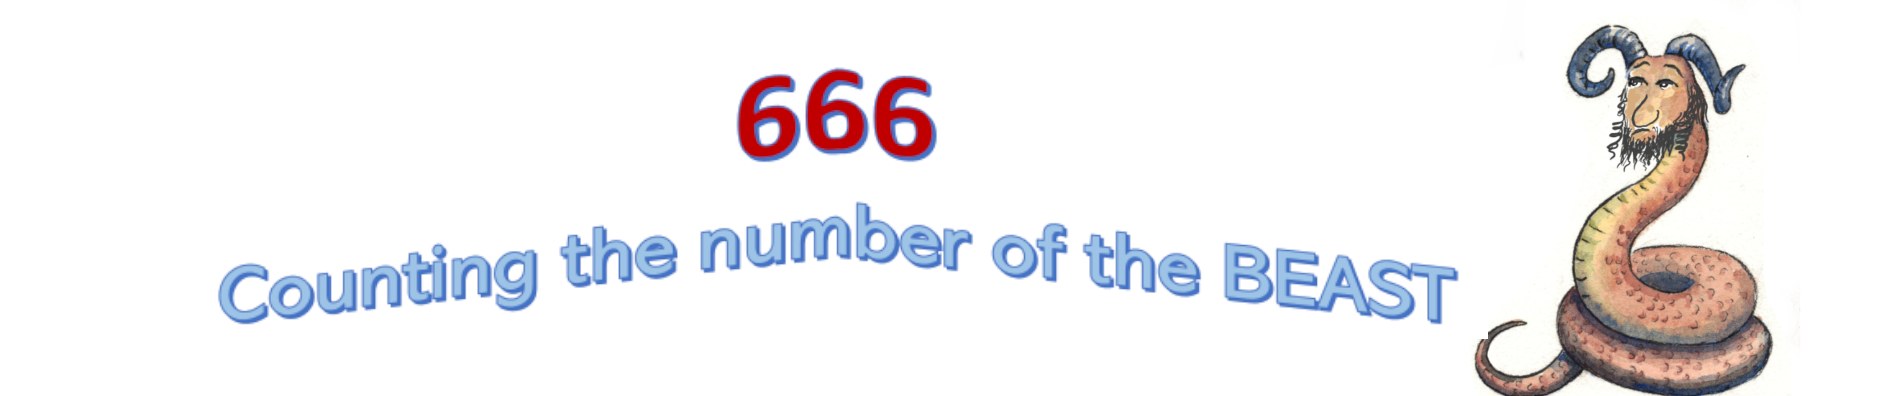 666 counting the number